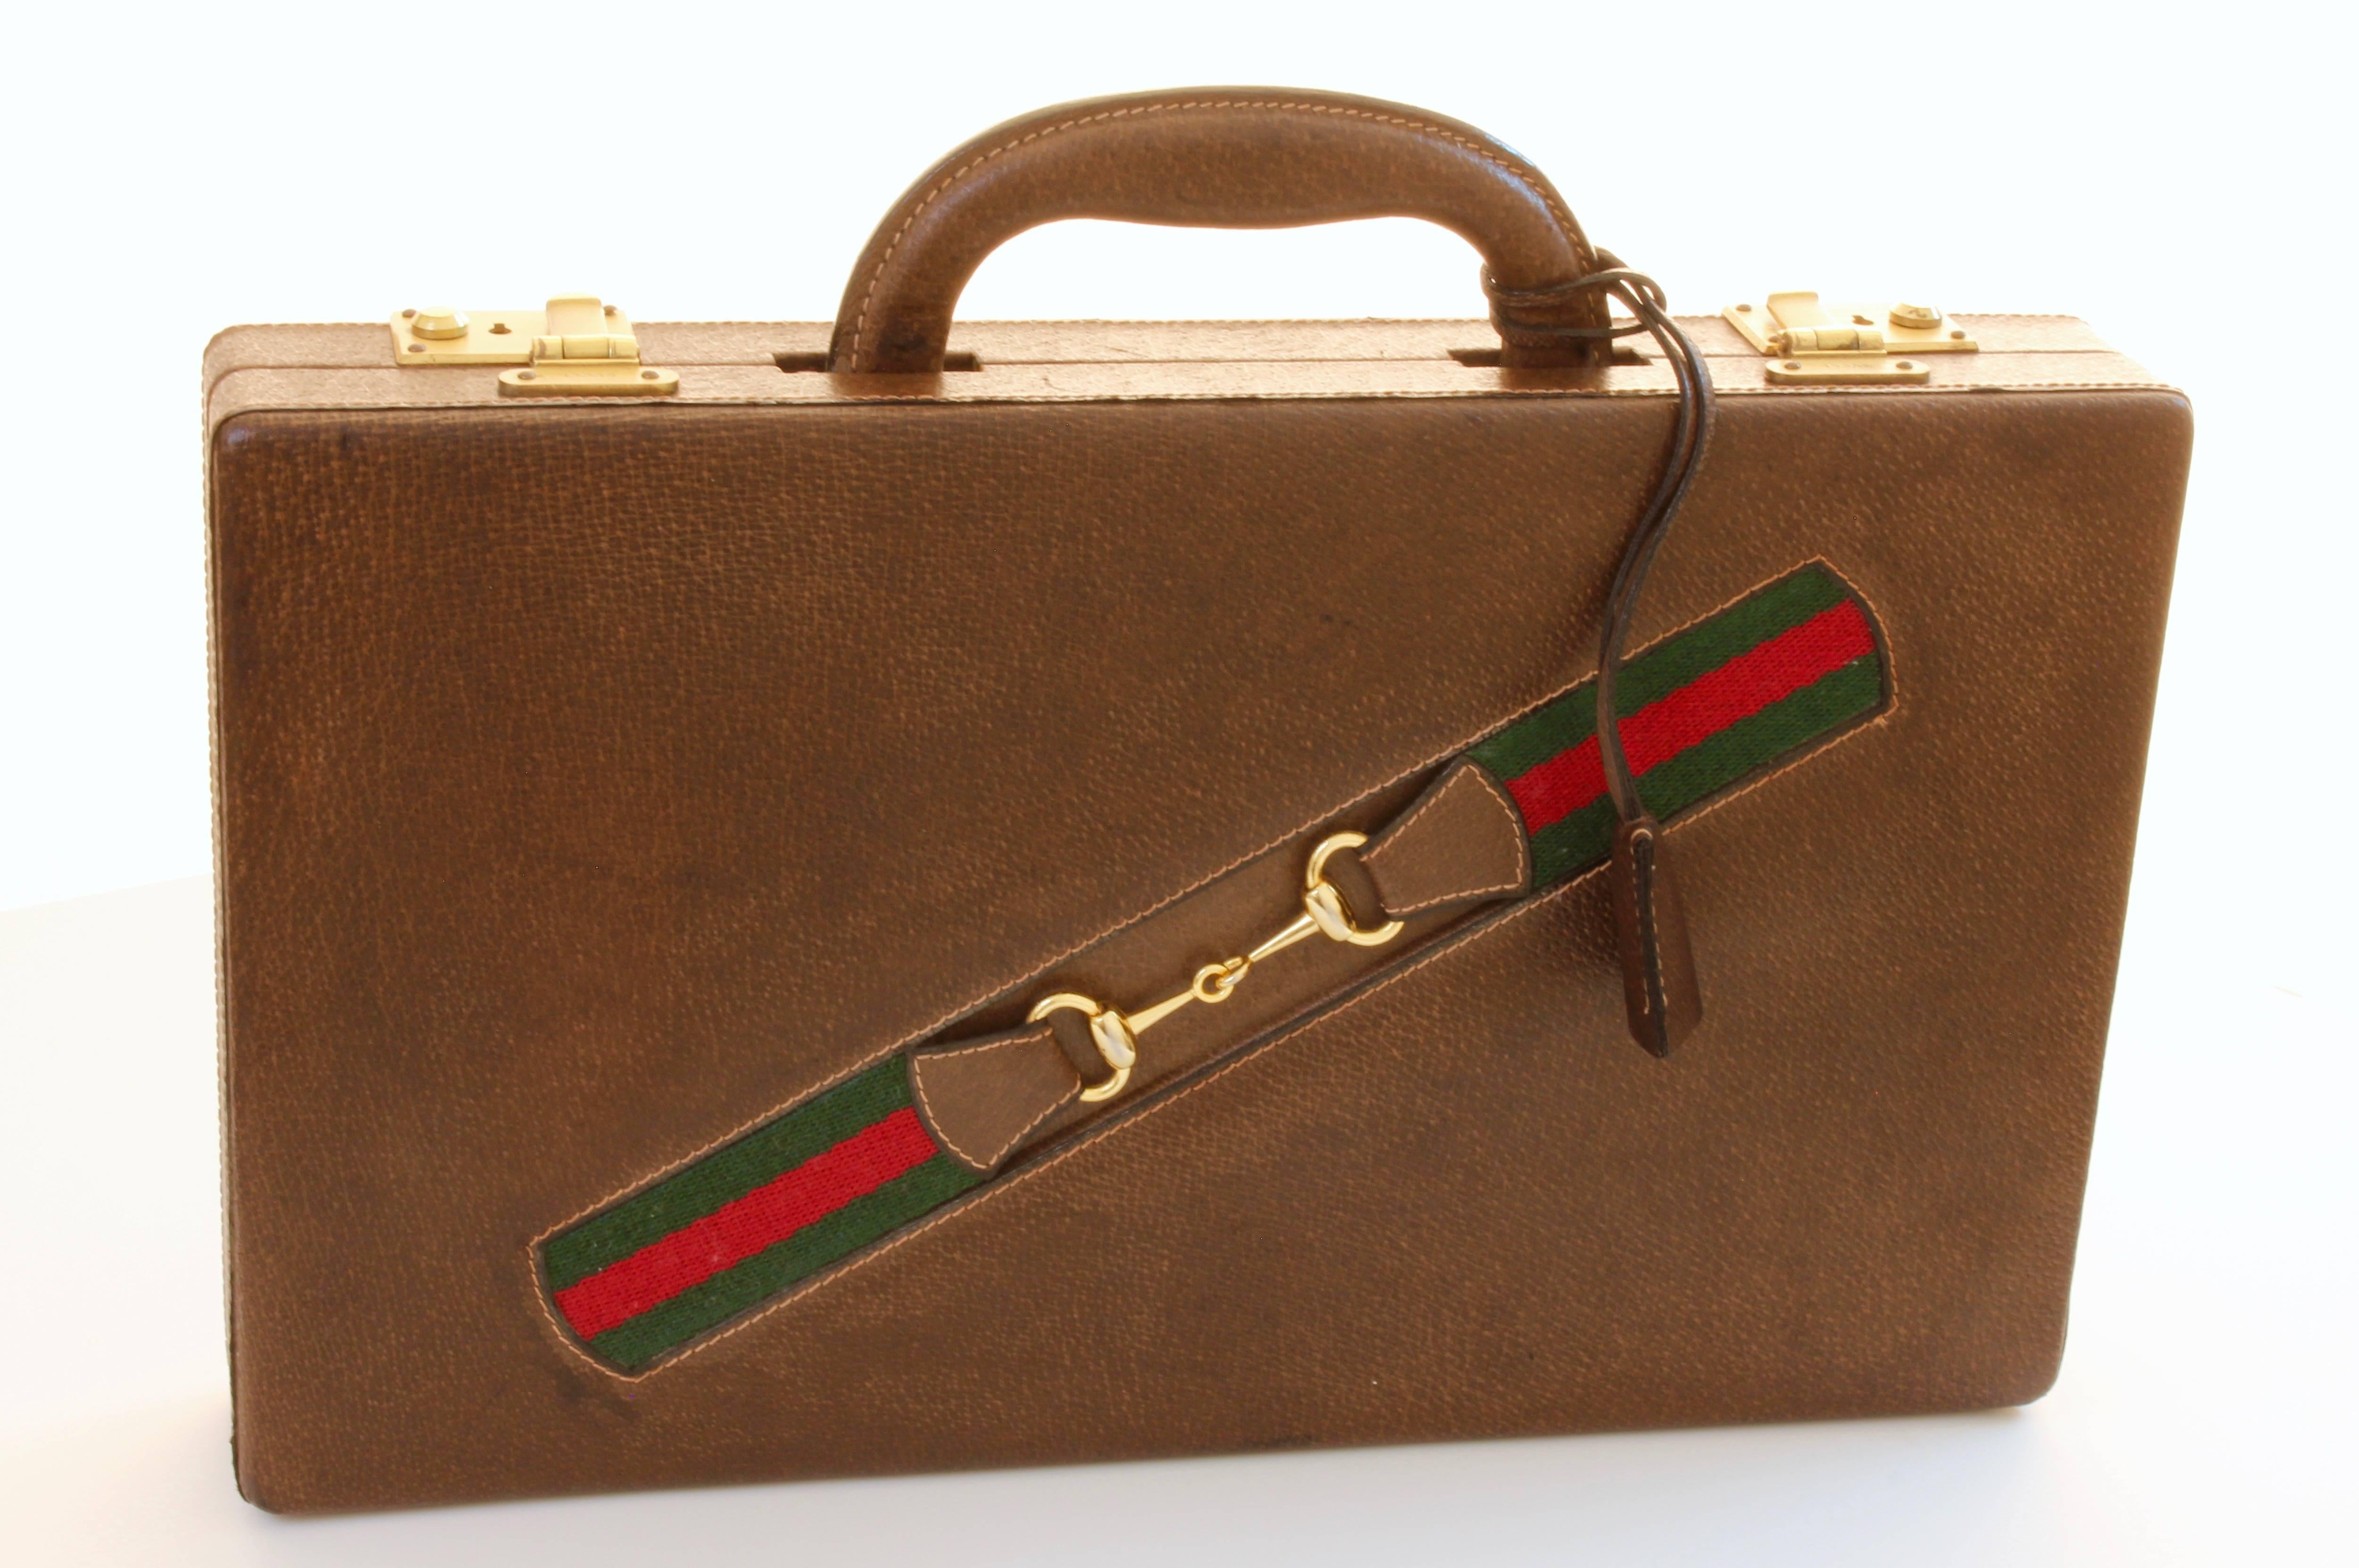 This vintage portable backgammon set was made by Gucci, most likely in the mid 1970s,  The travel case is made from pigskin leather and features Gucci's iconic webbing with a gold tone horse bit.  Inside, there's a tricolor wood board and removable